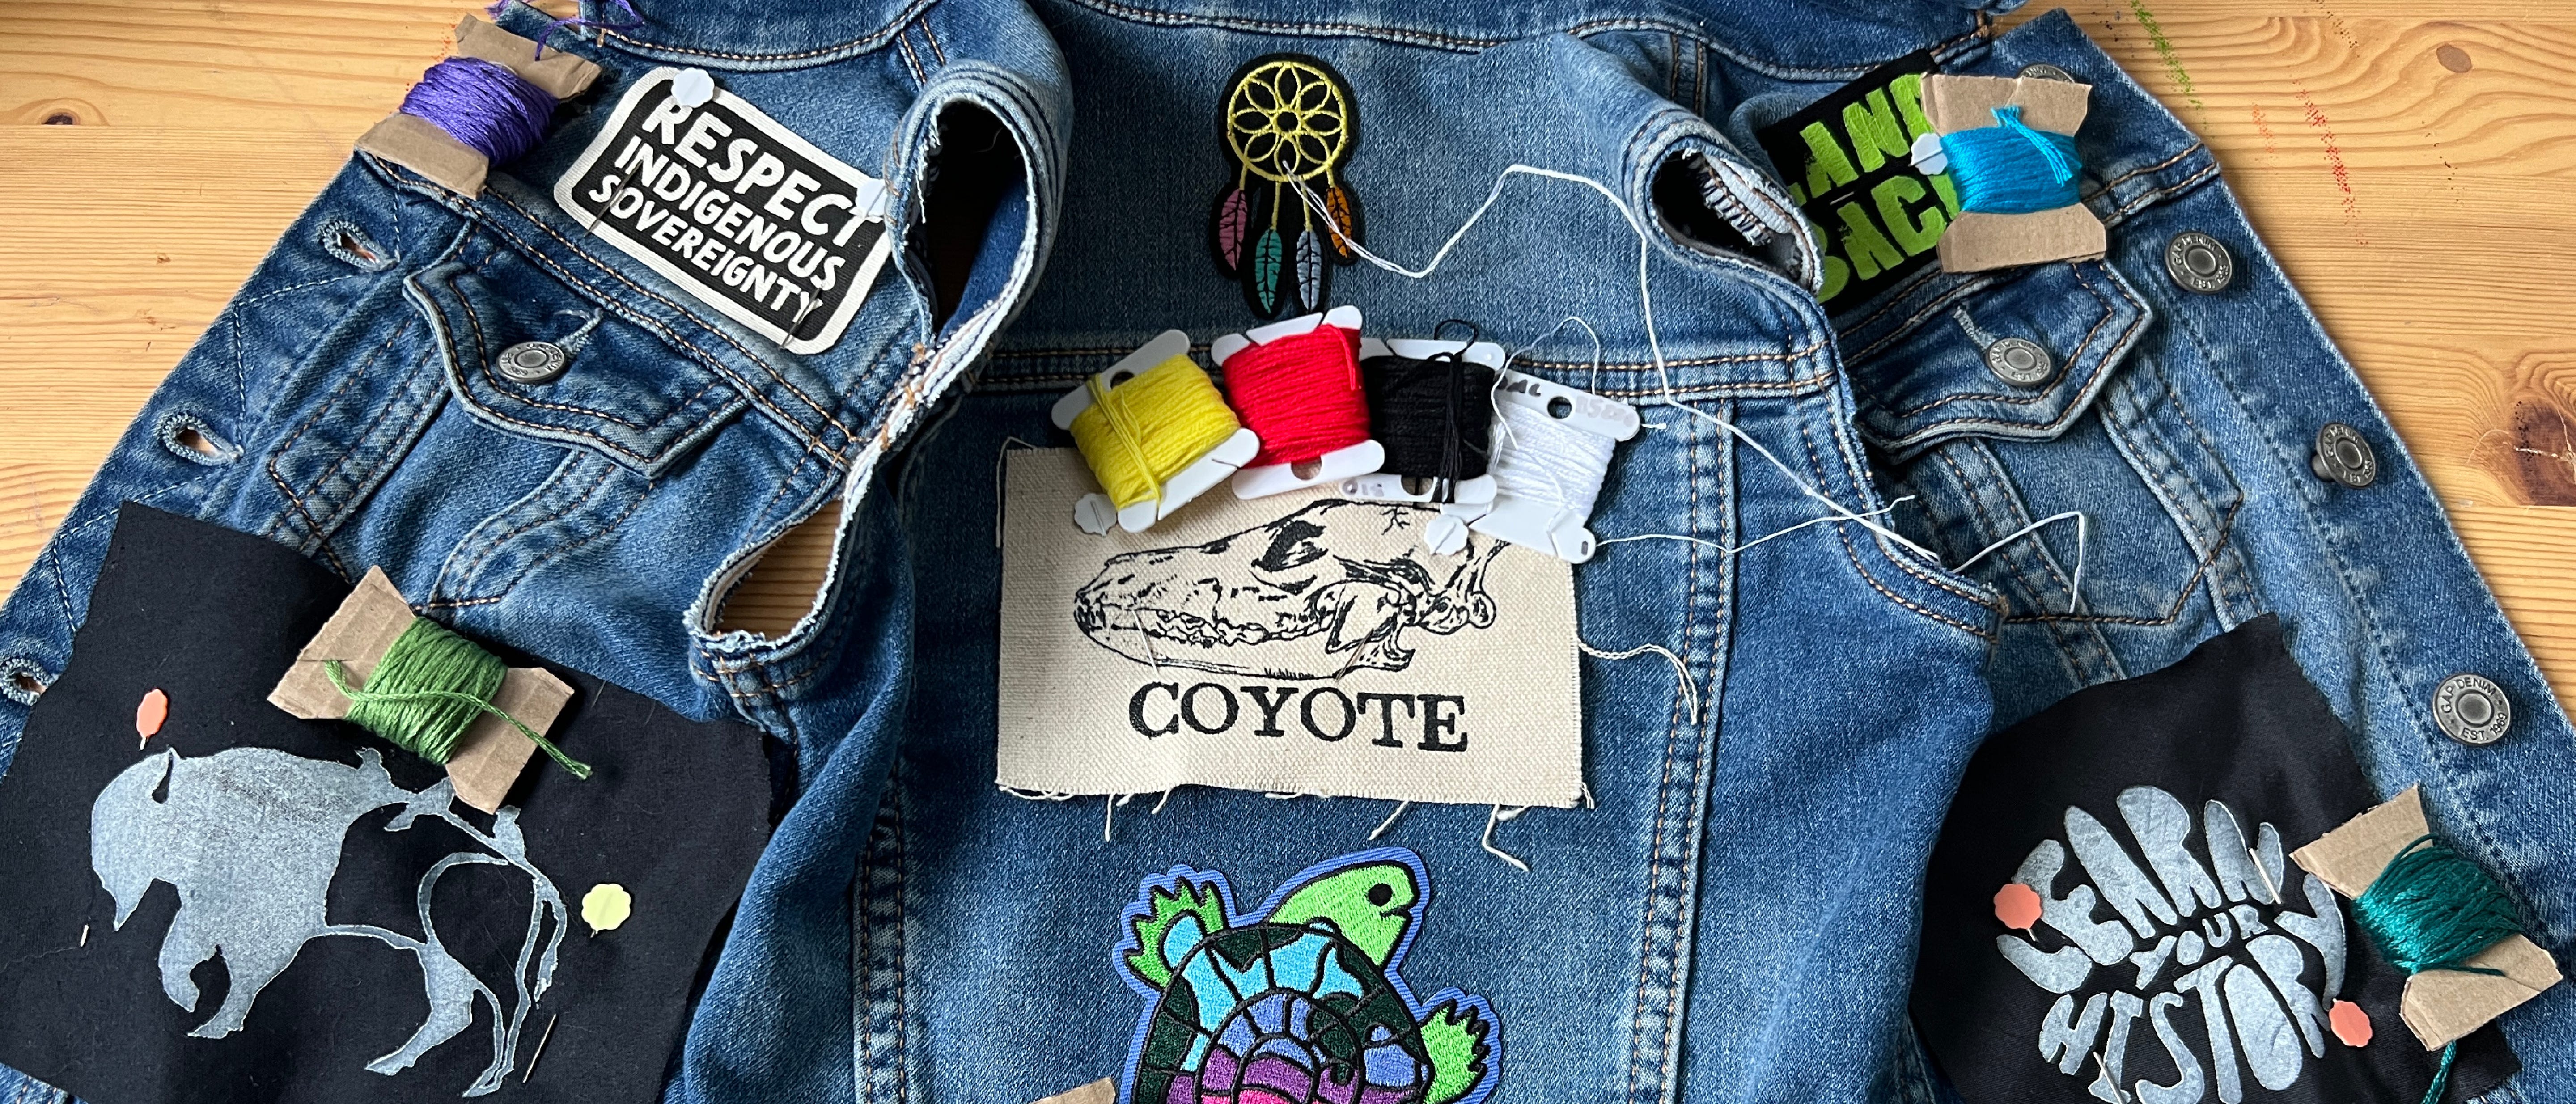 Photo of a denim vest spread out on a wooden desk with patches laid out on it next to embroidery floss on bobbins to be used on each patch. The patches follow an Indigenous resistance theme, withe slogans like "LandBack" and "Respect Indigenous Sovereignty". 